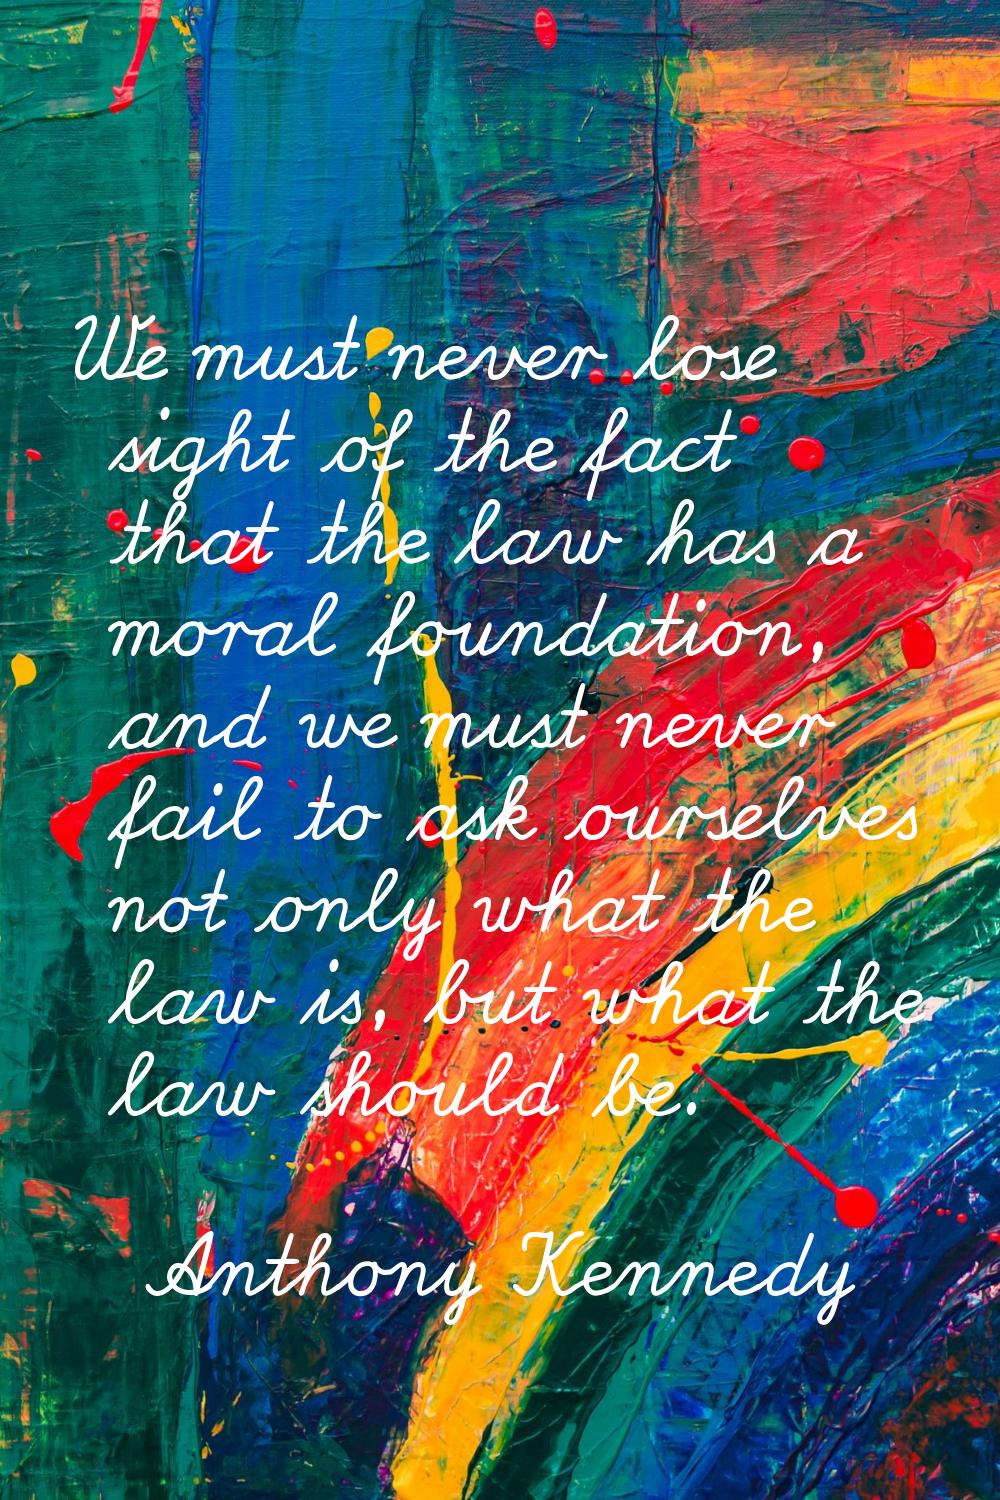 We must never lose sight of the fact that the law has a moral foundation, and we must never fail to